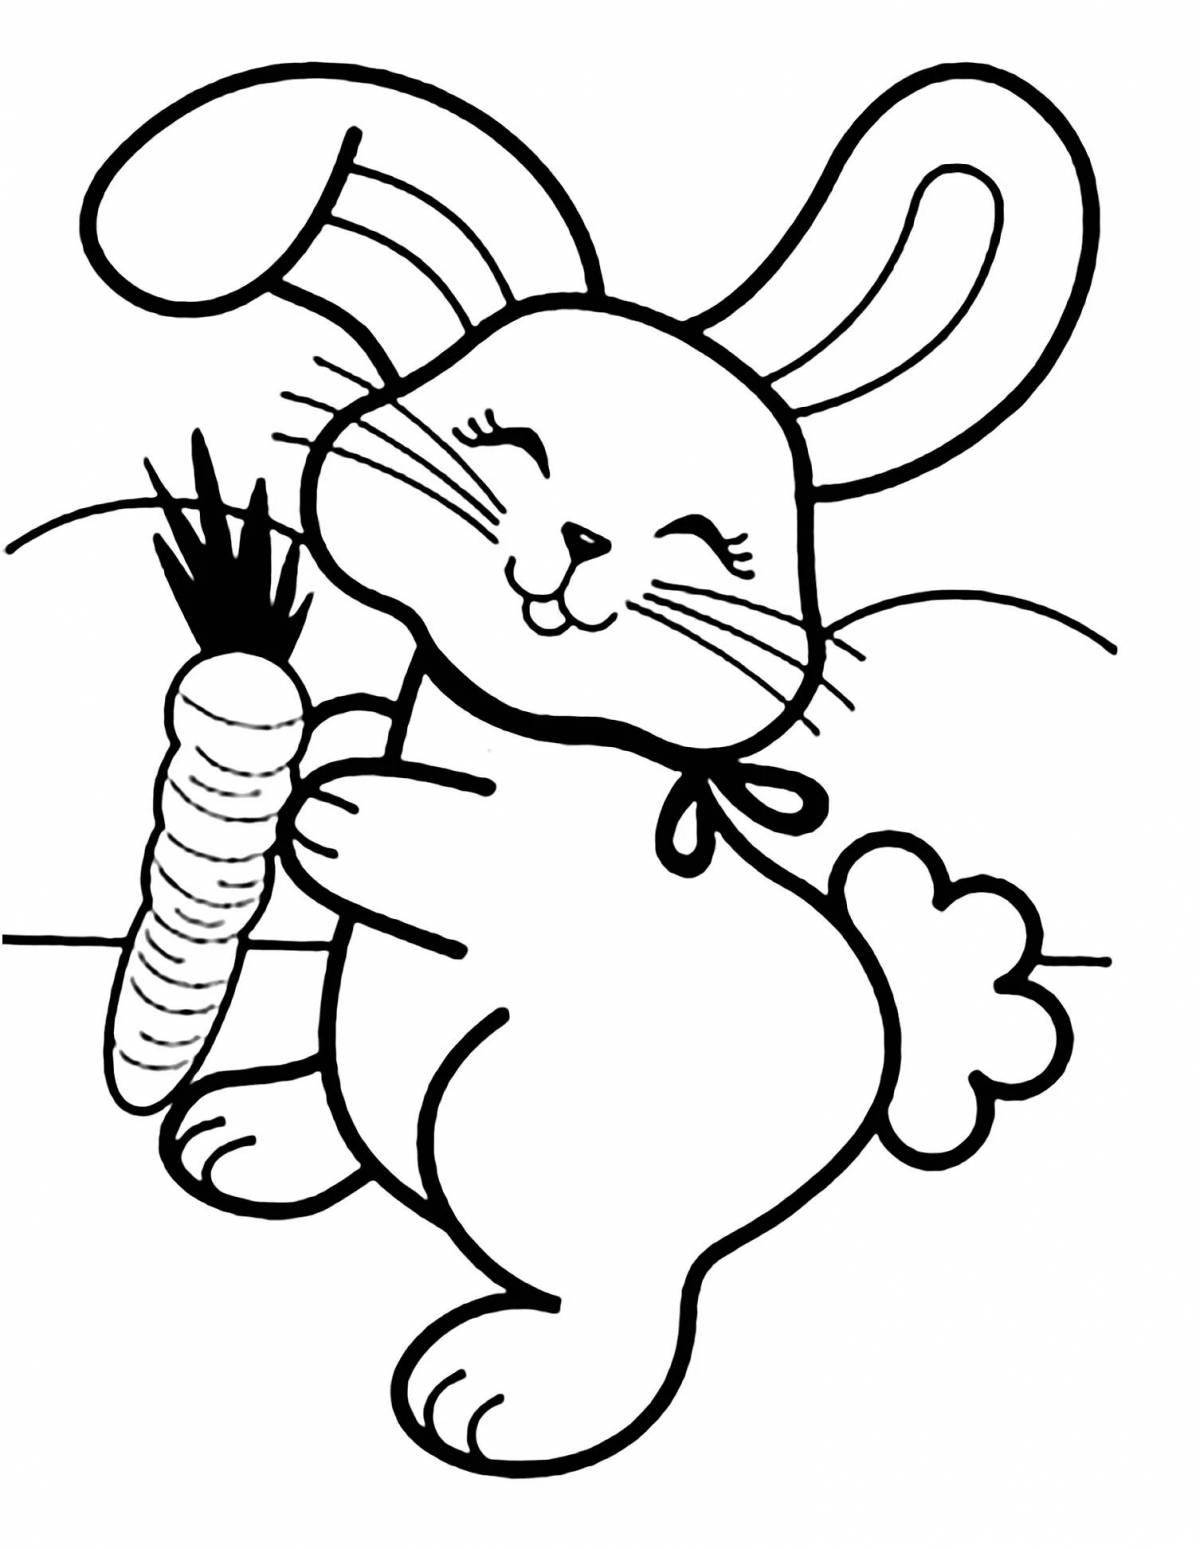 Animated rabbit coloring book for kids